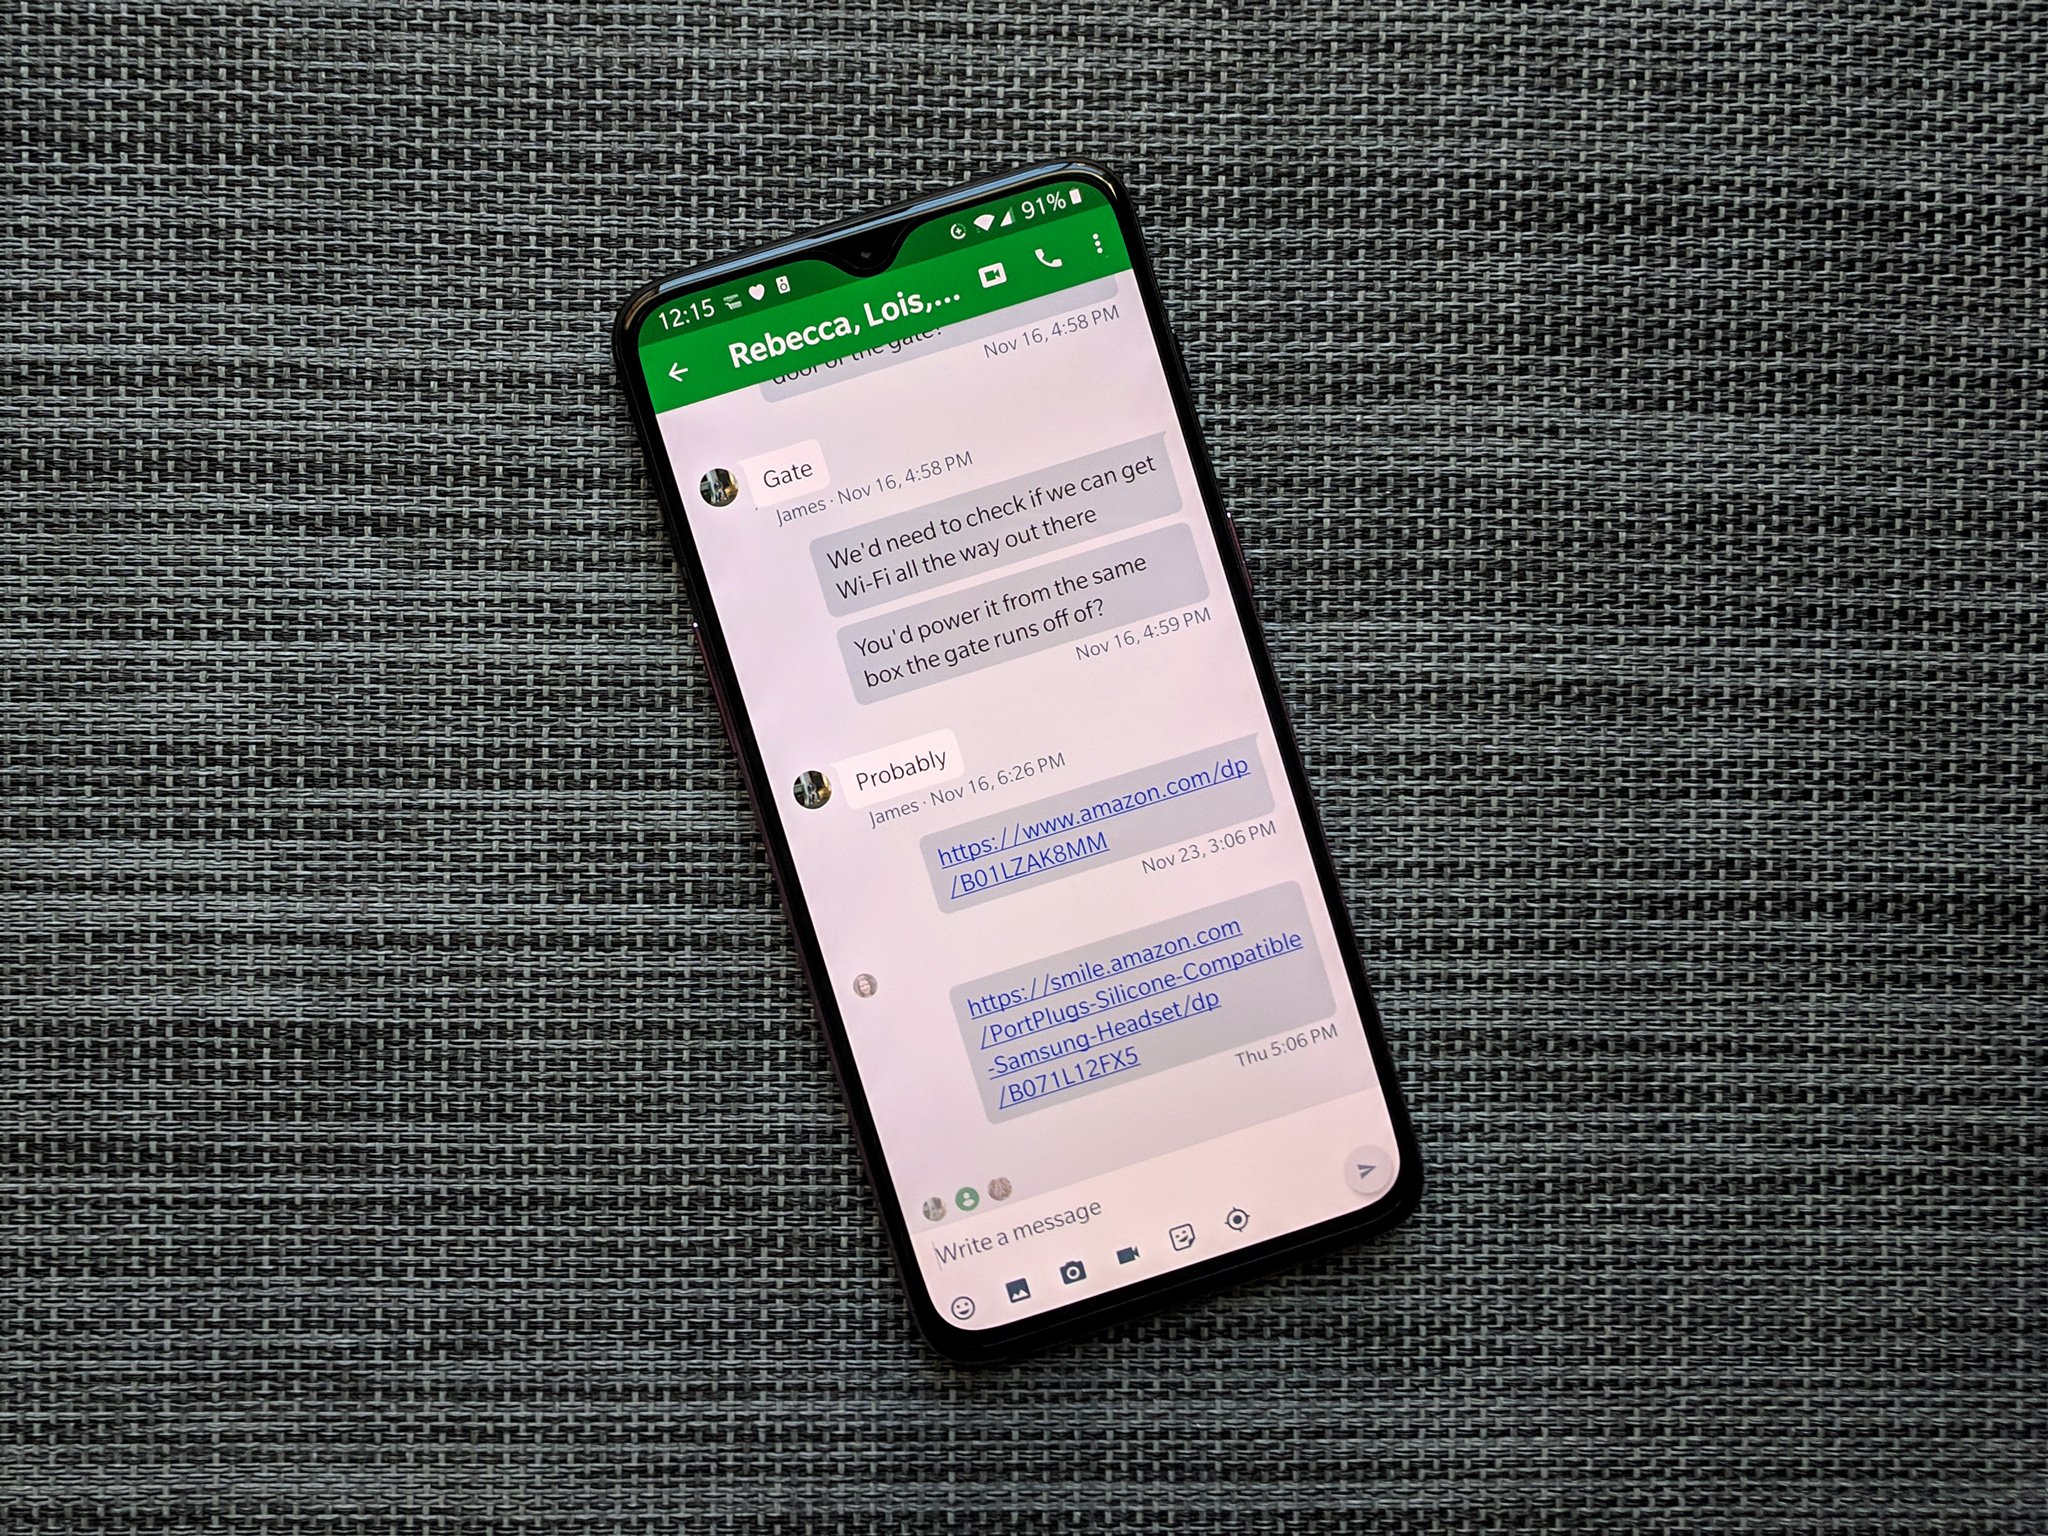 Google Hangouts on a OnePlus 6T